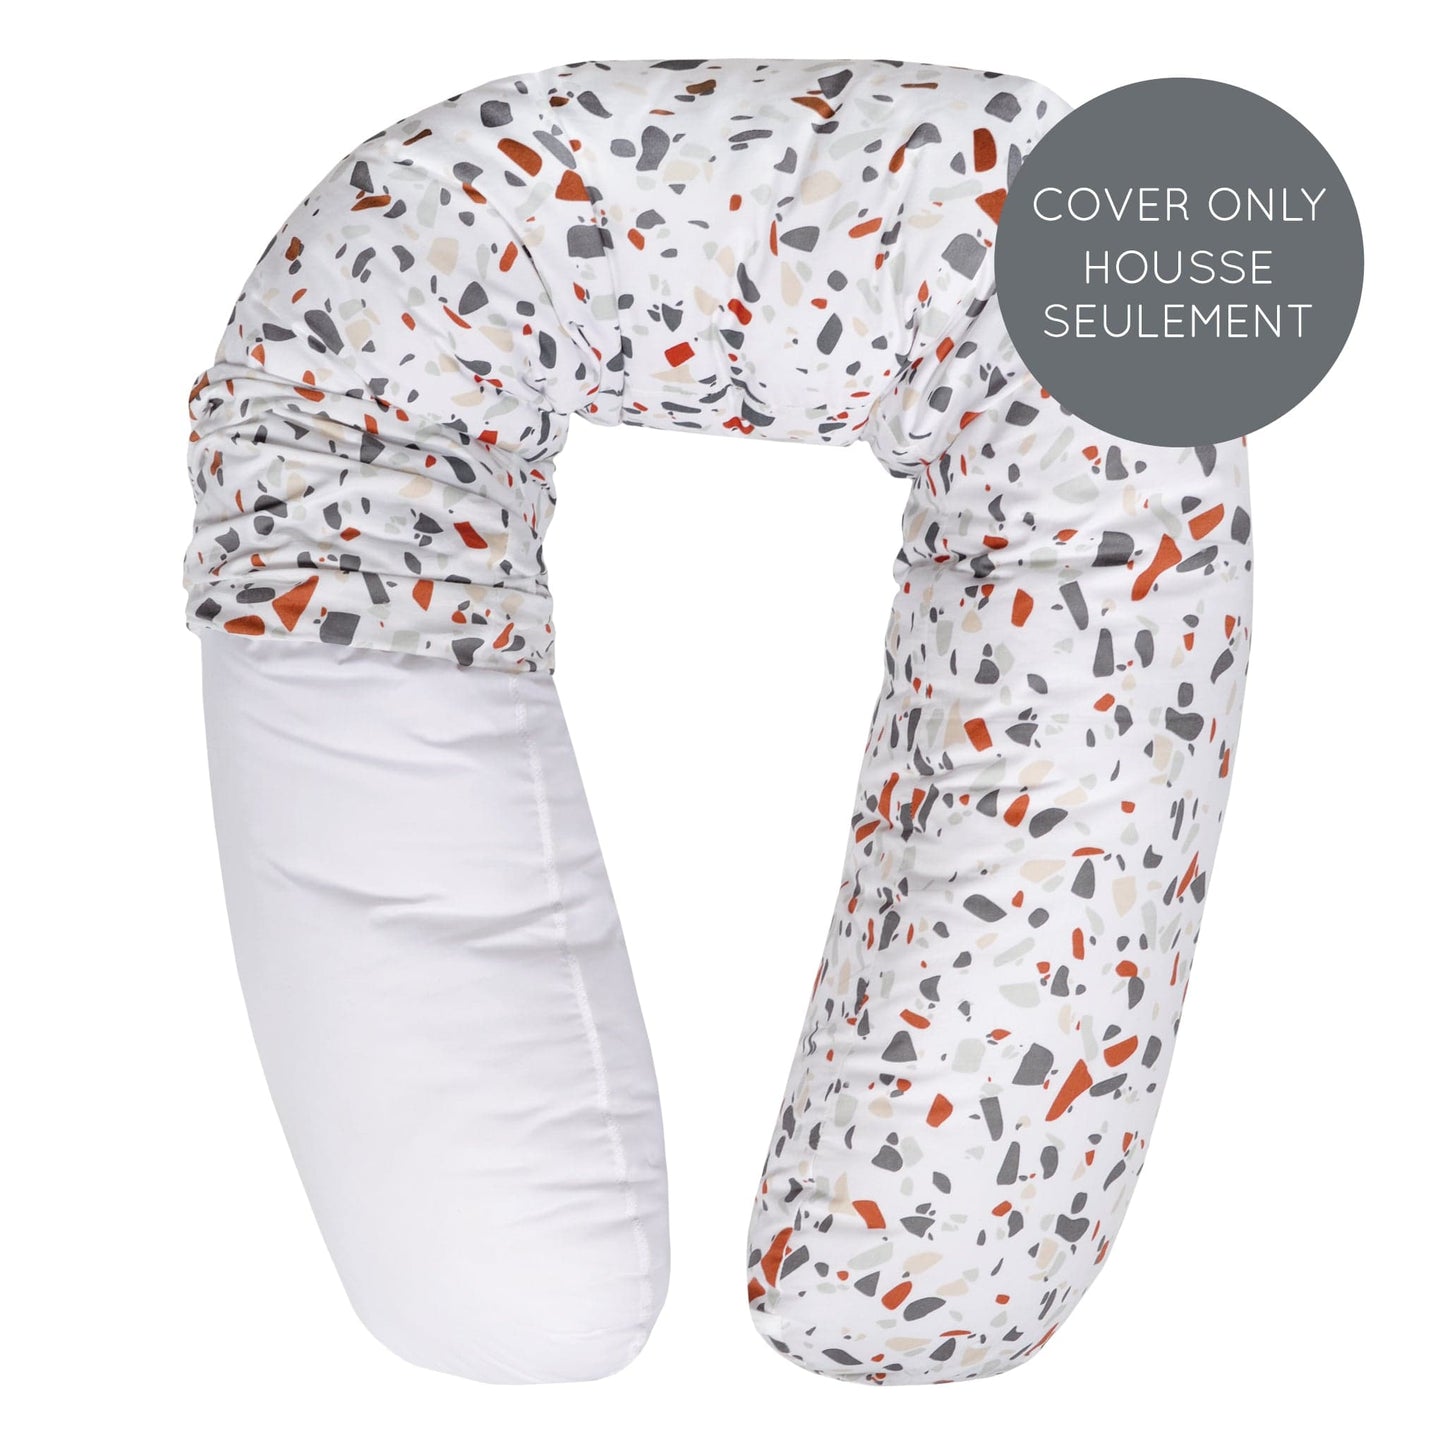 Multifunctional pregnancy pillow - COVER ONLY